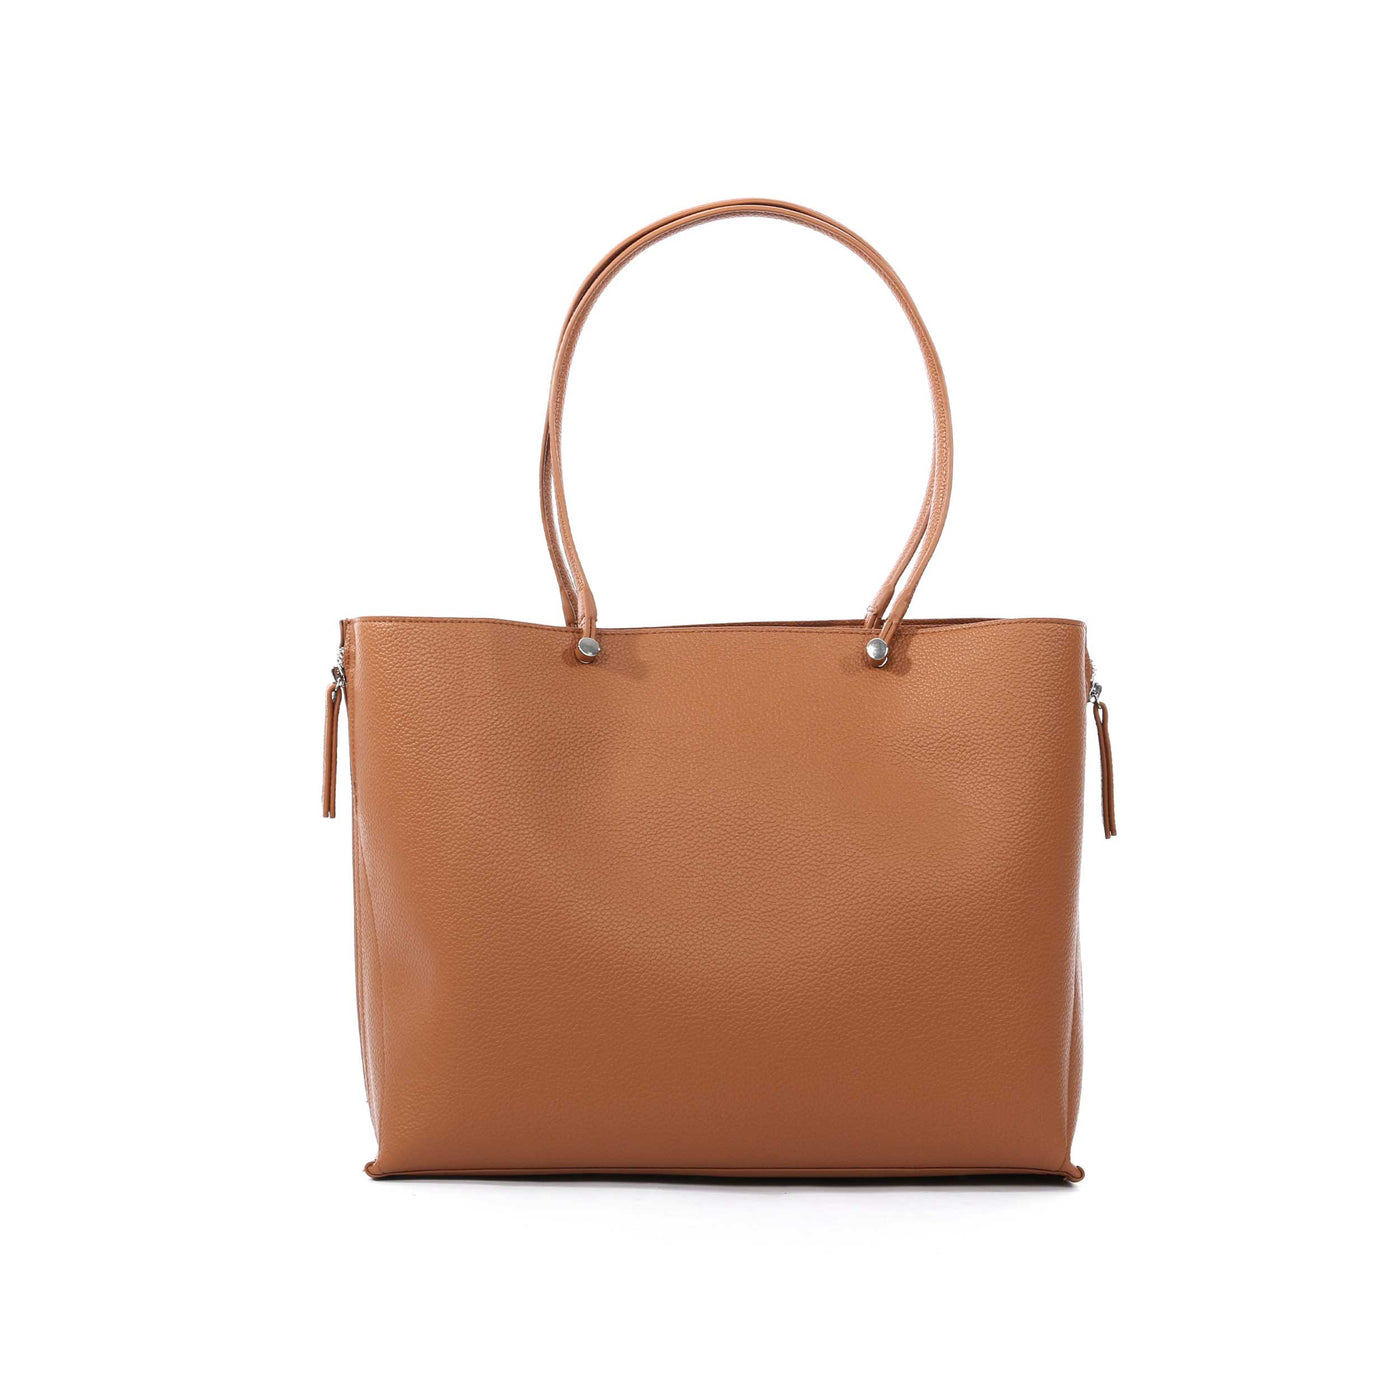 Valentino Bags Parka Ladies Tote Bag in Tan Cuoio Back